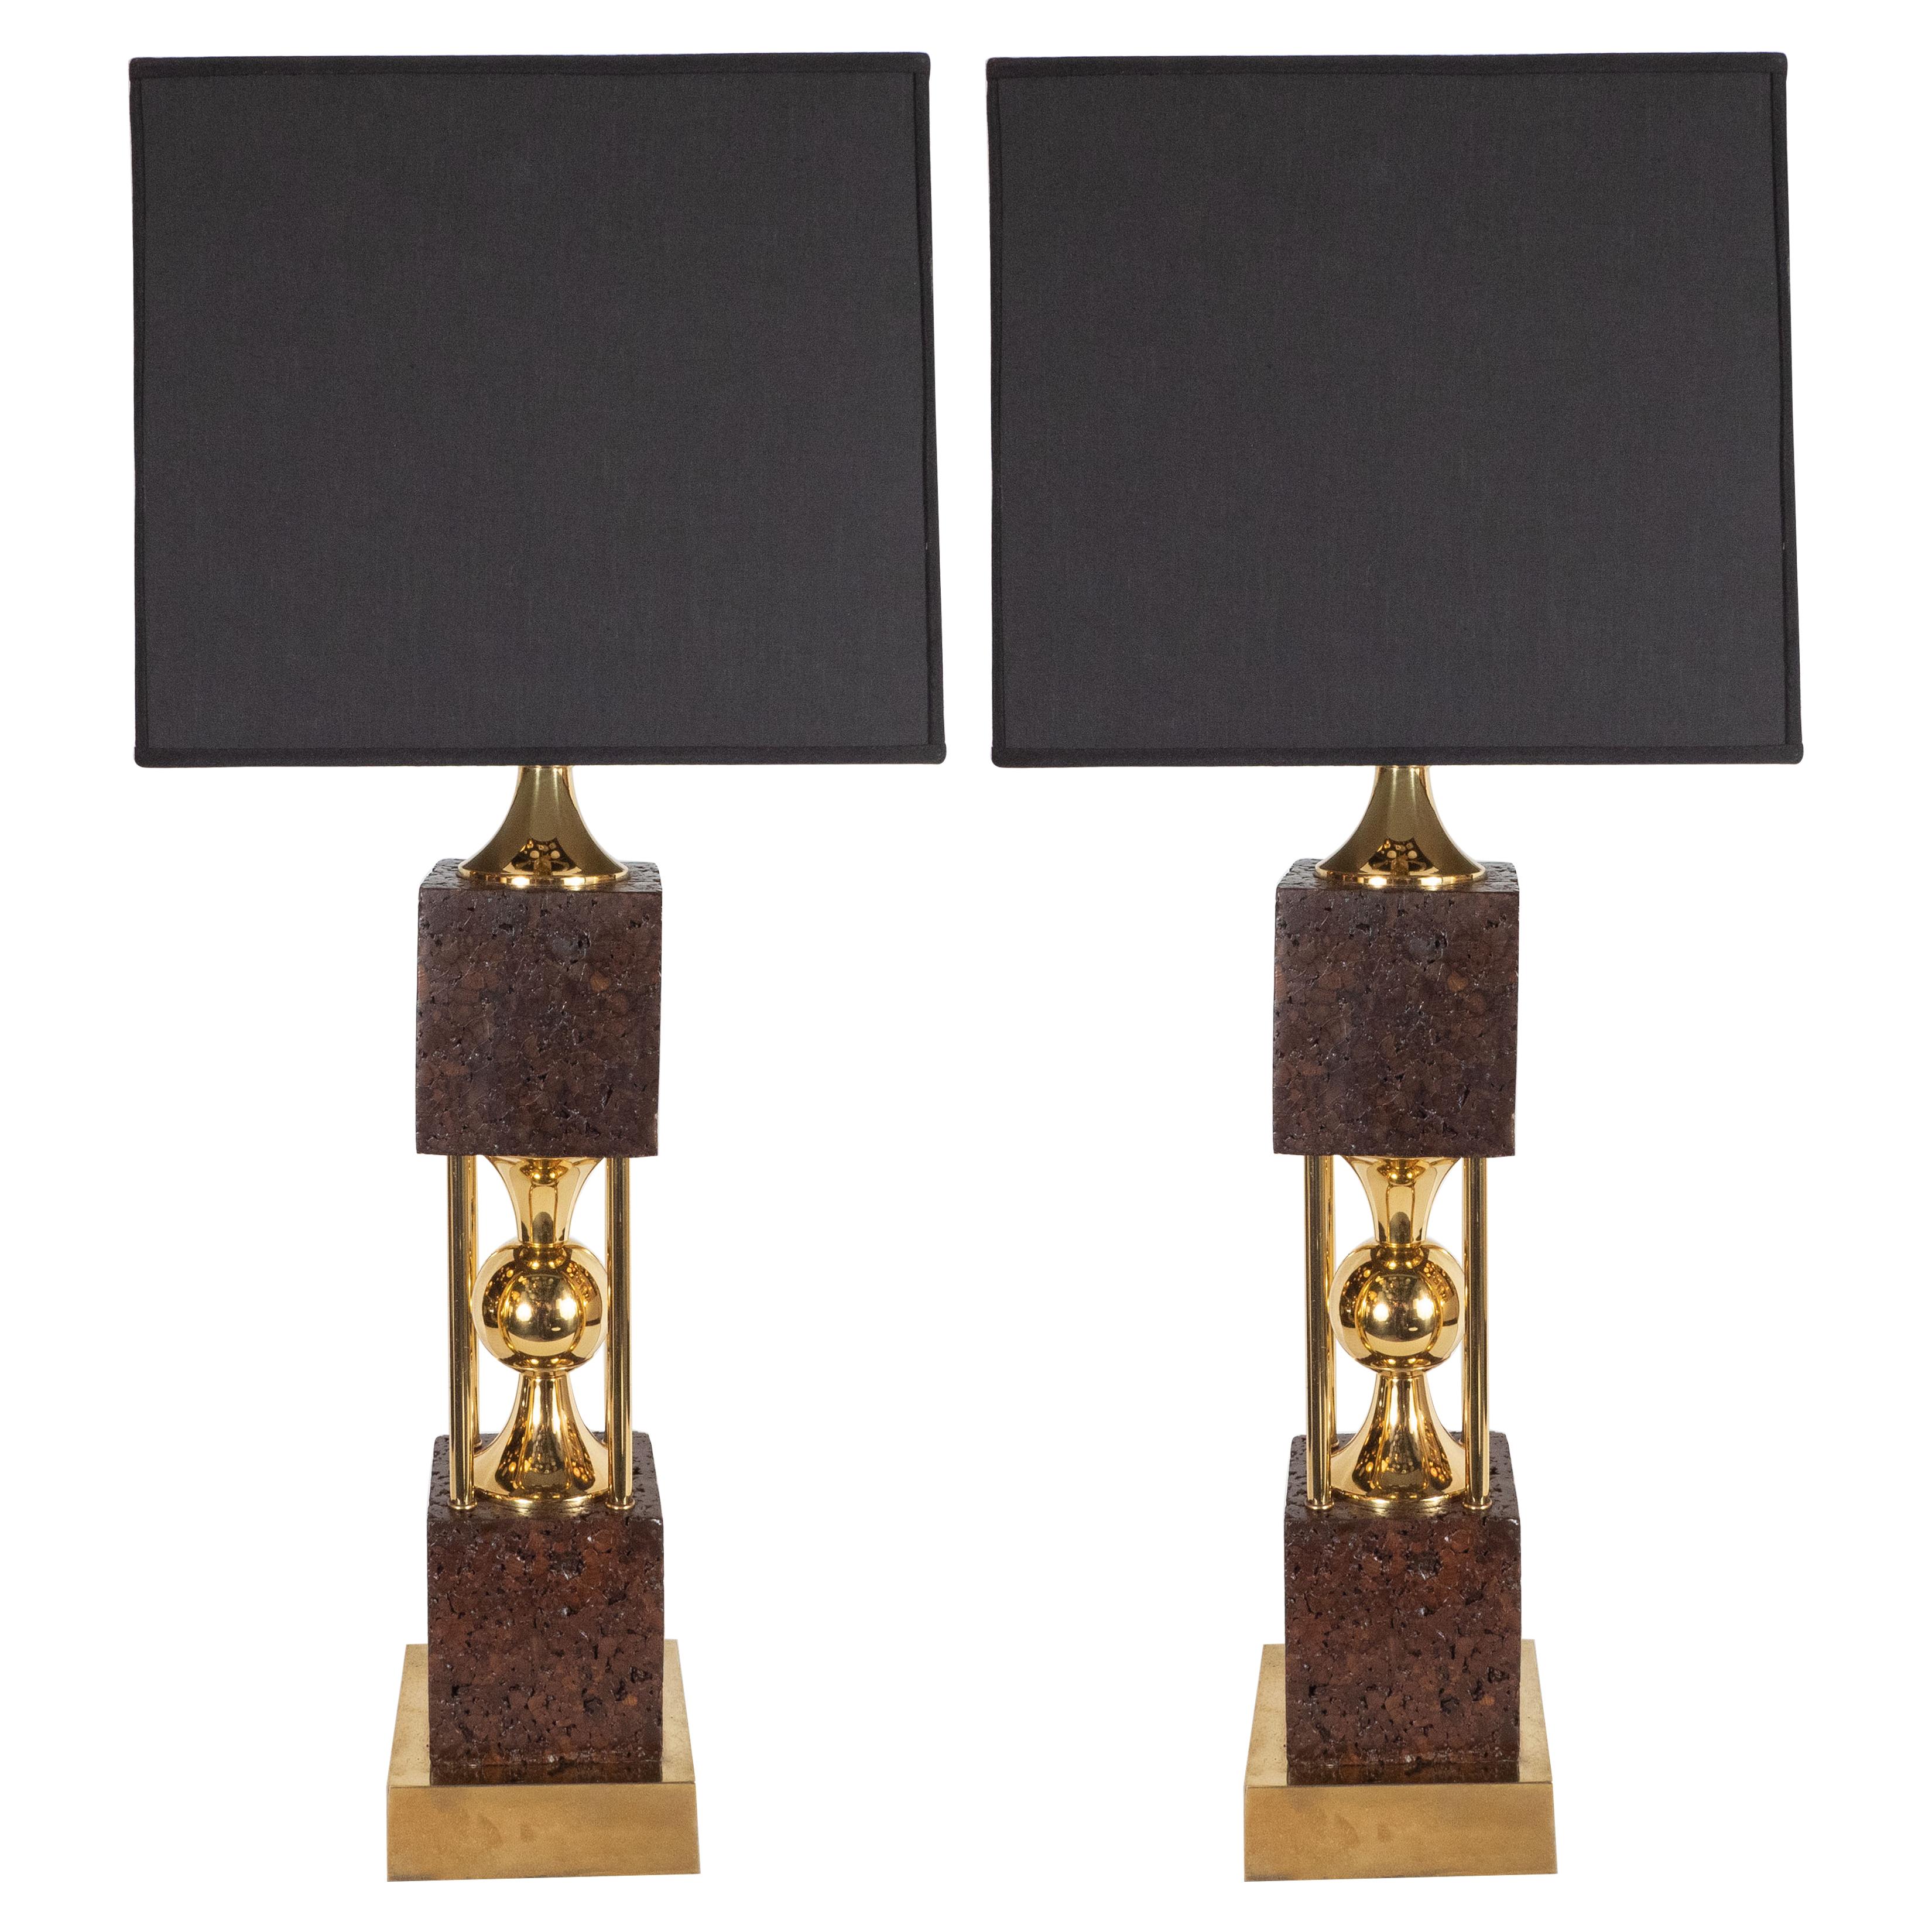 Pair of Sculptural Mid-Century Modern Polished Brass and Cork Table Lamps